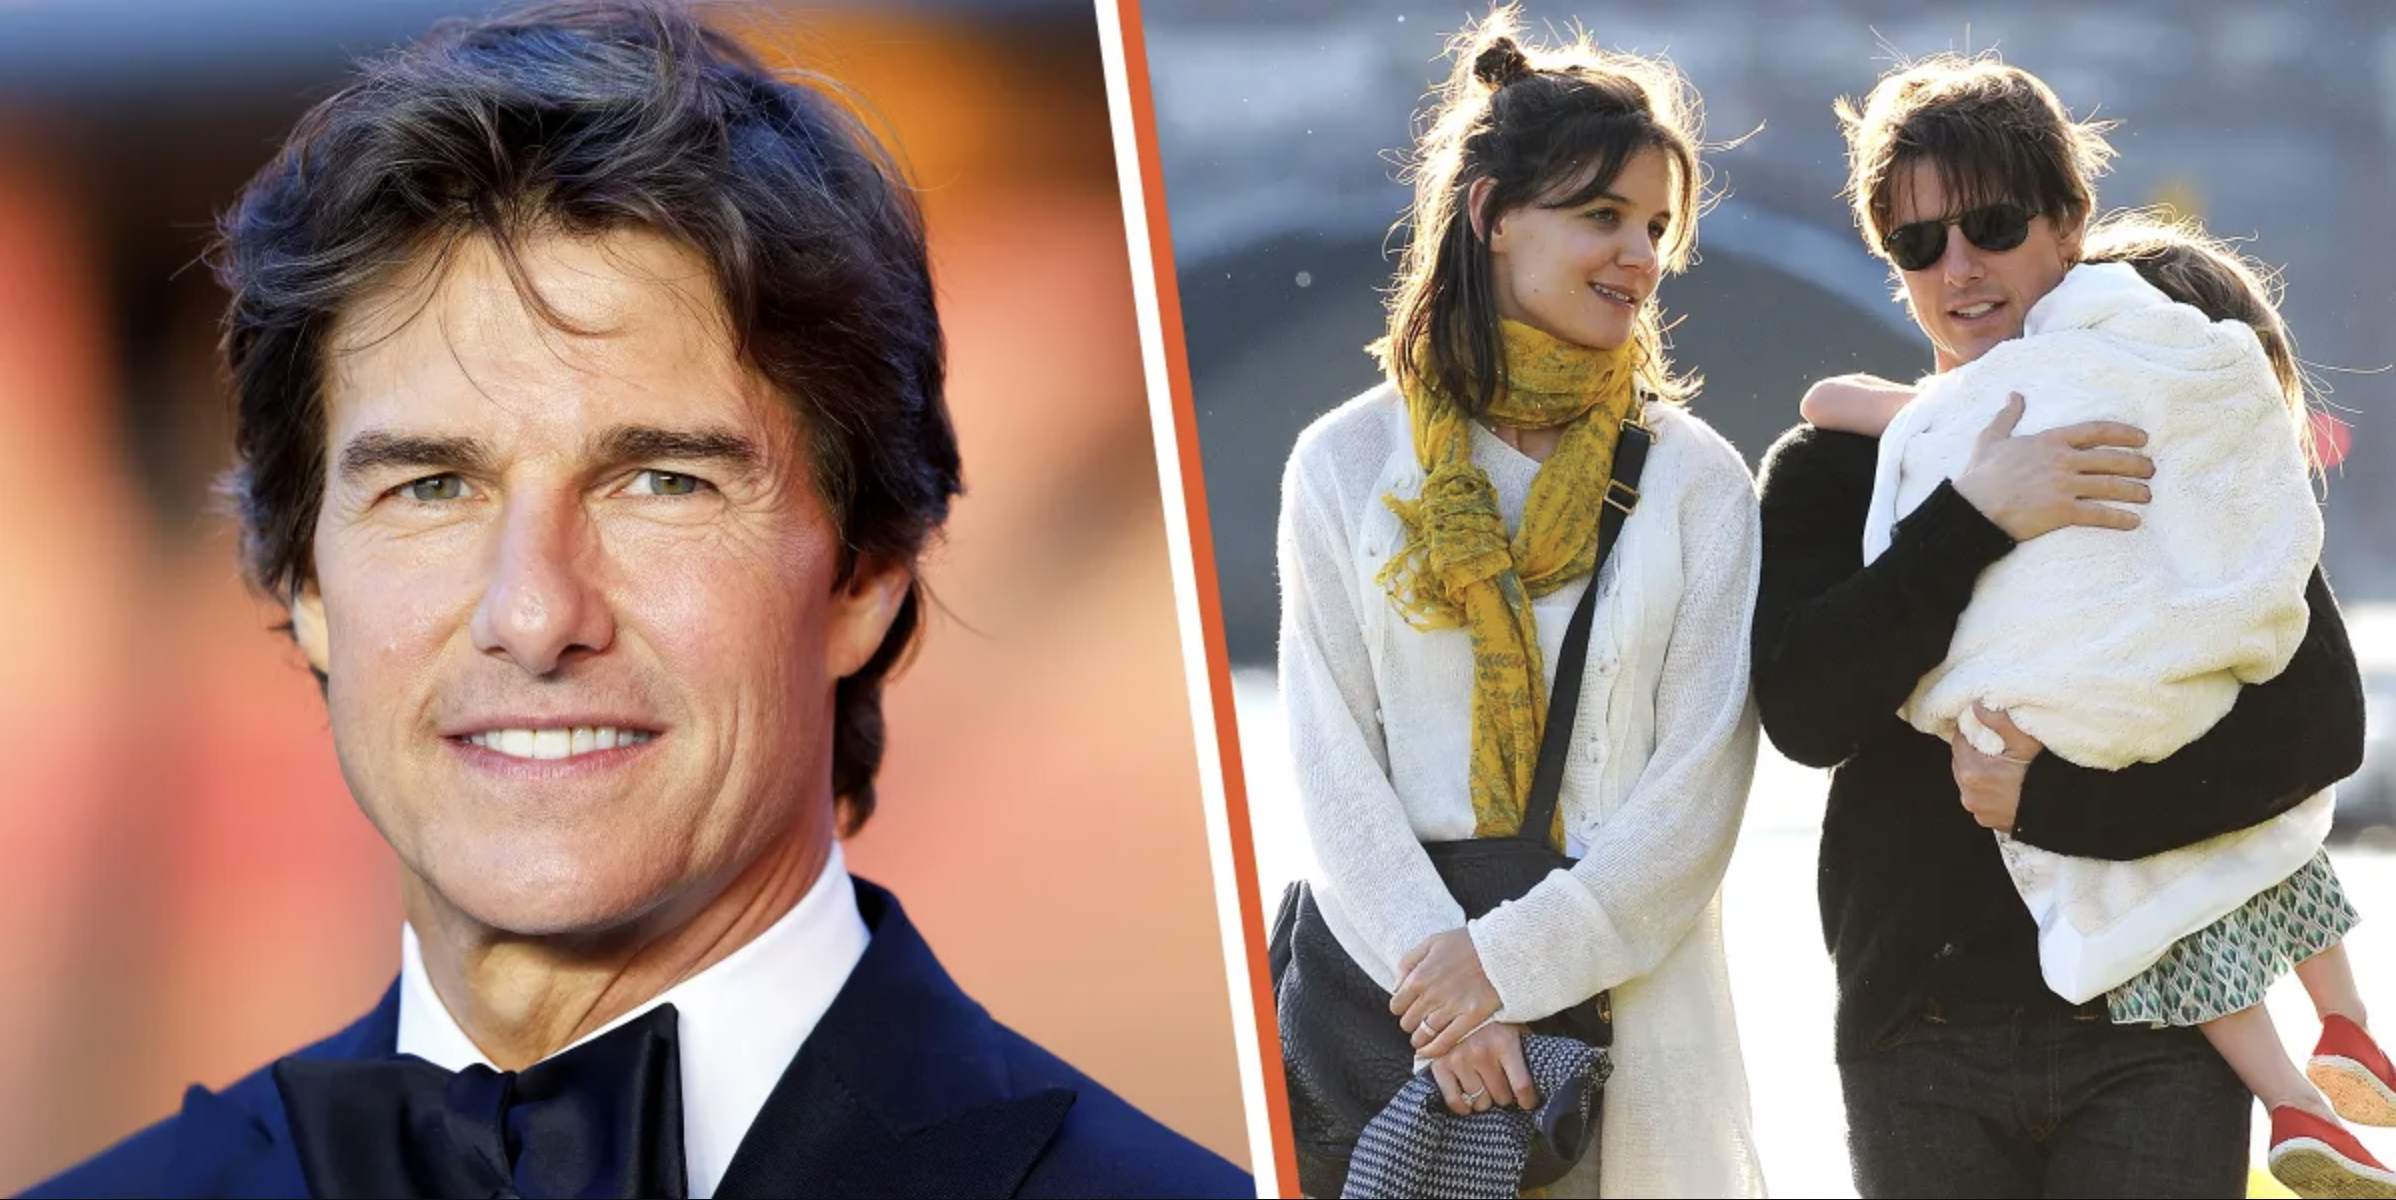 Tom Cruise | Tom Cruise, Katie Holmes and Suri Cruise | Source: Getty Images